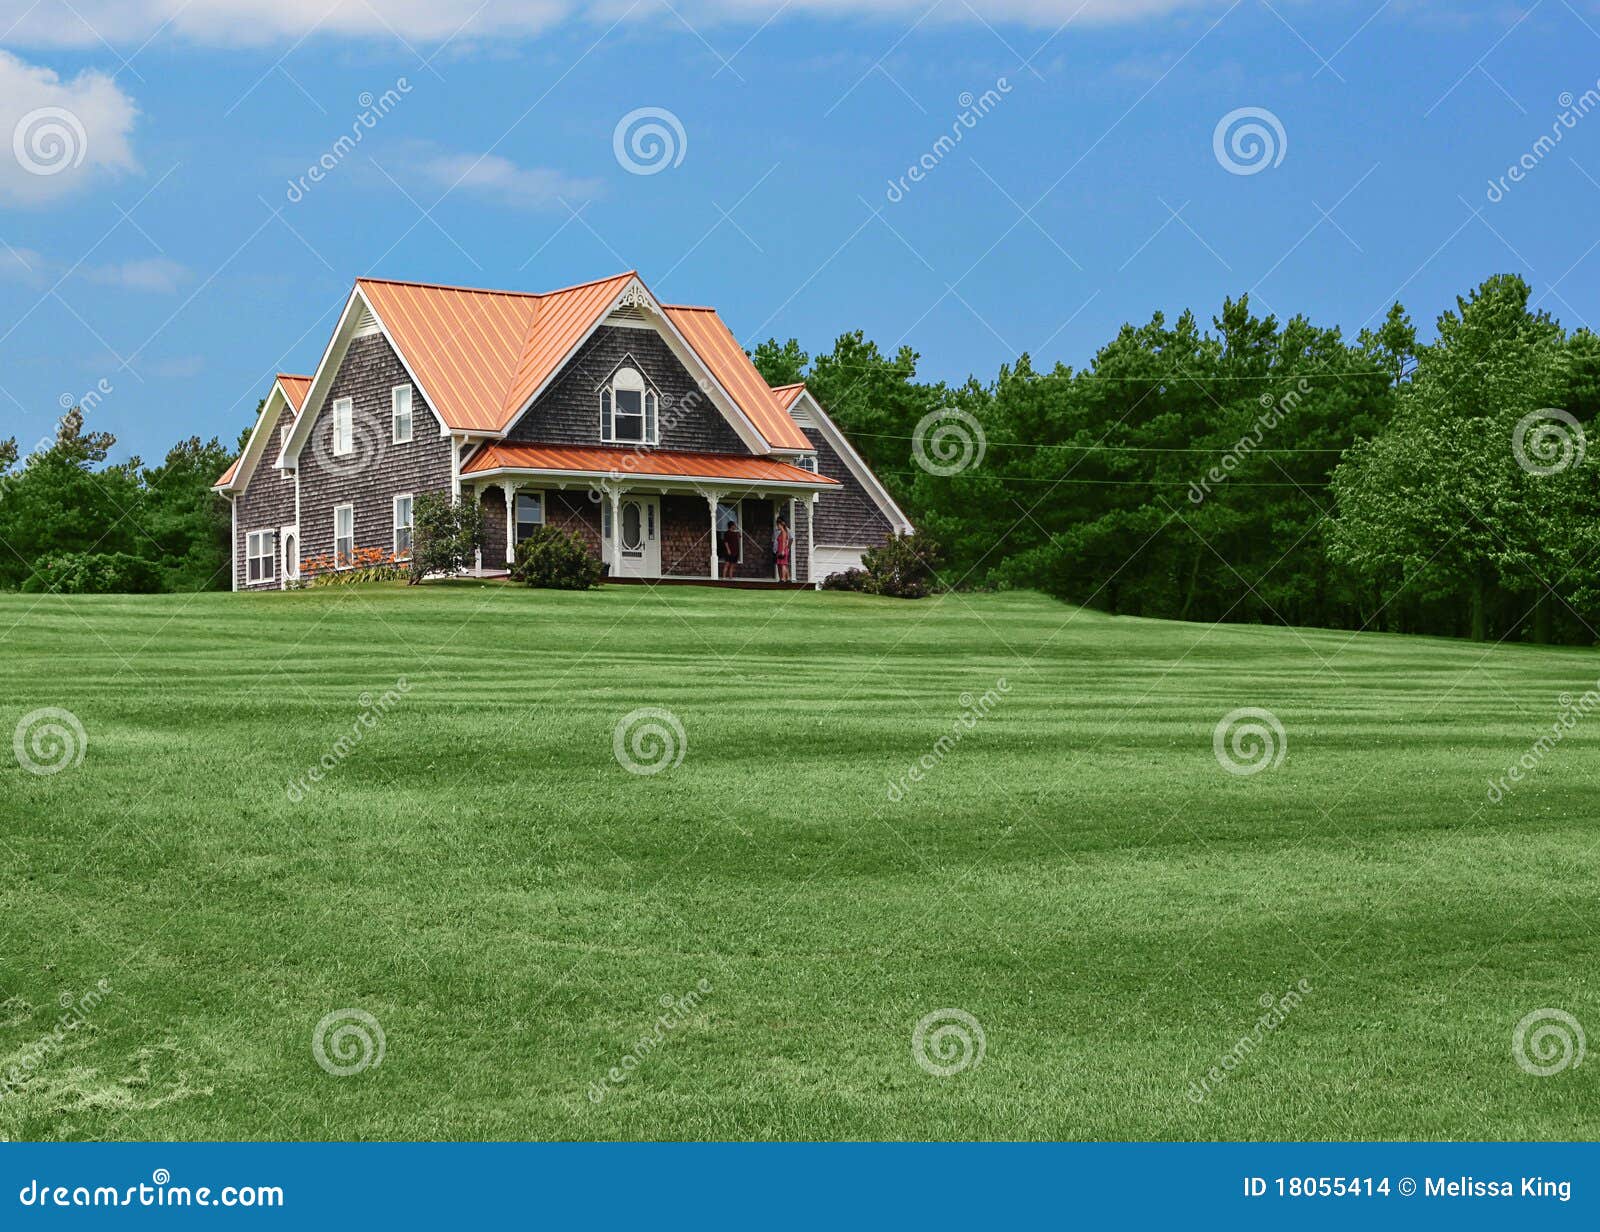 country house and lawn